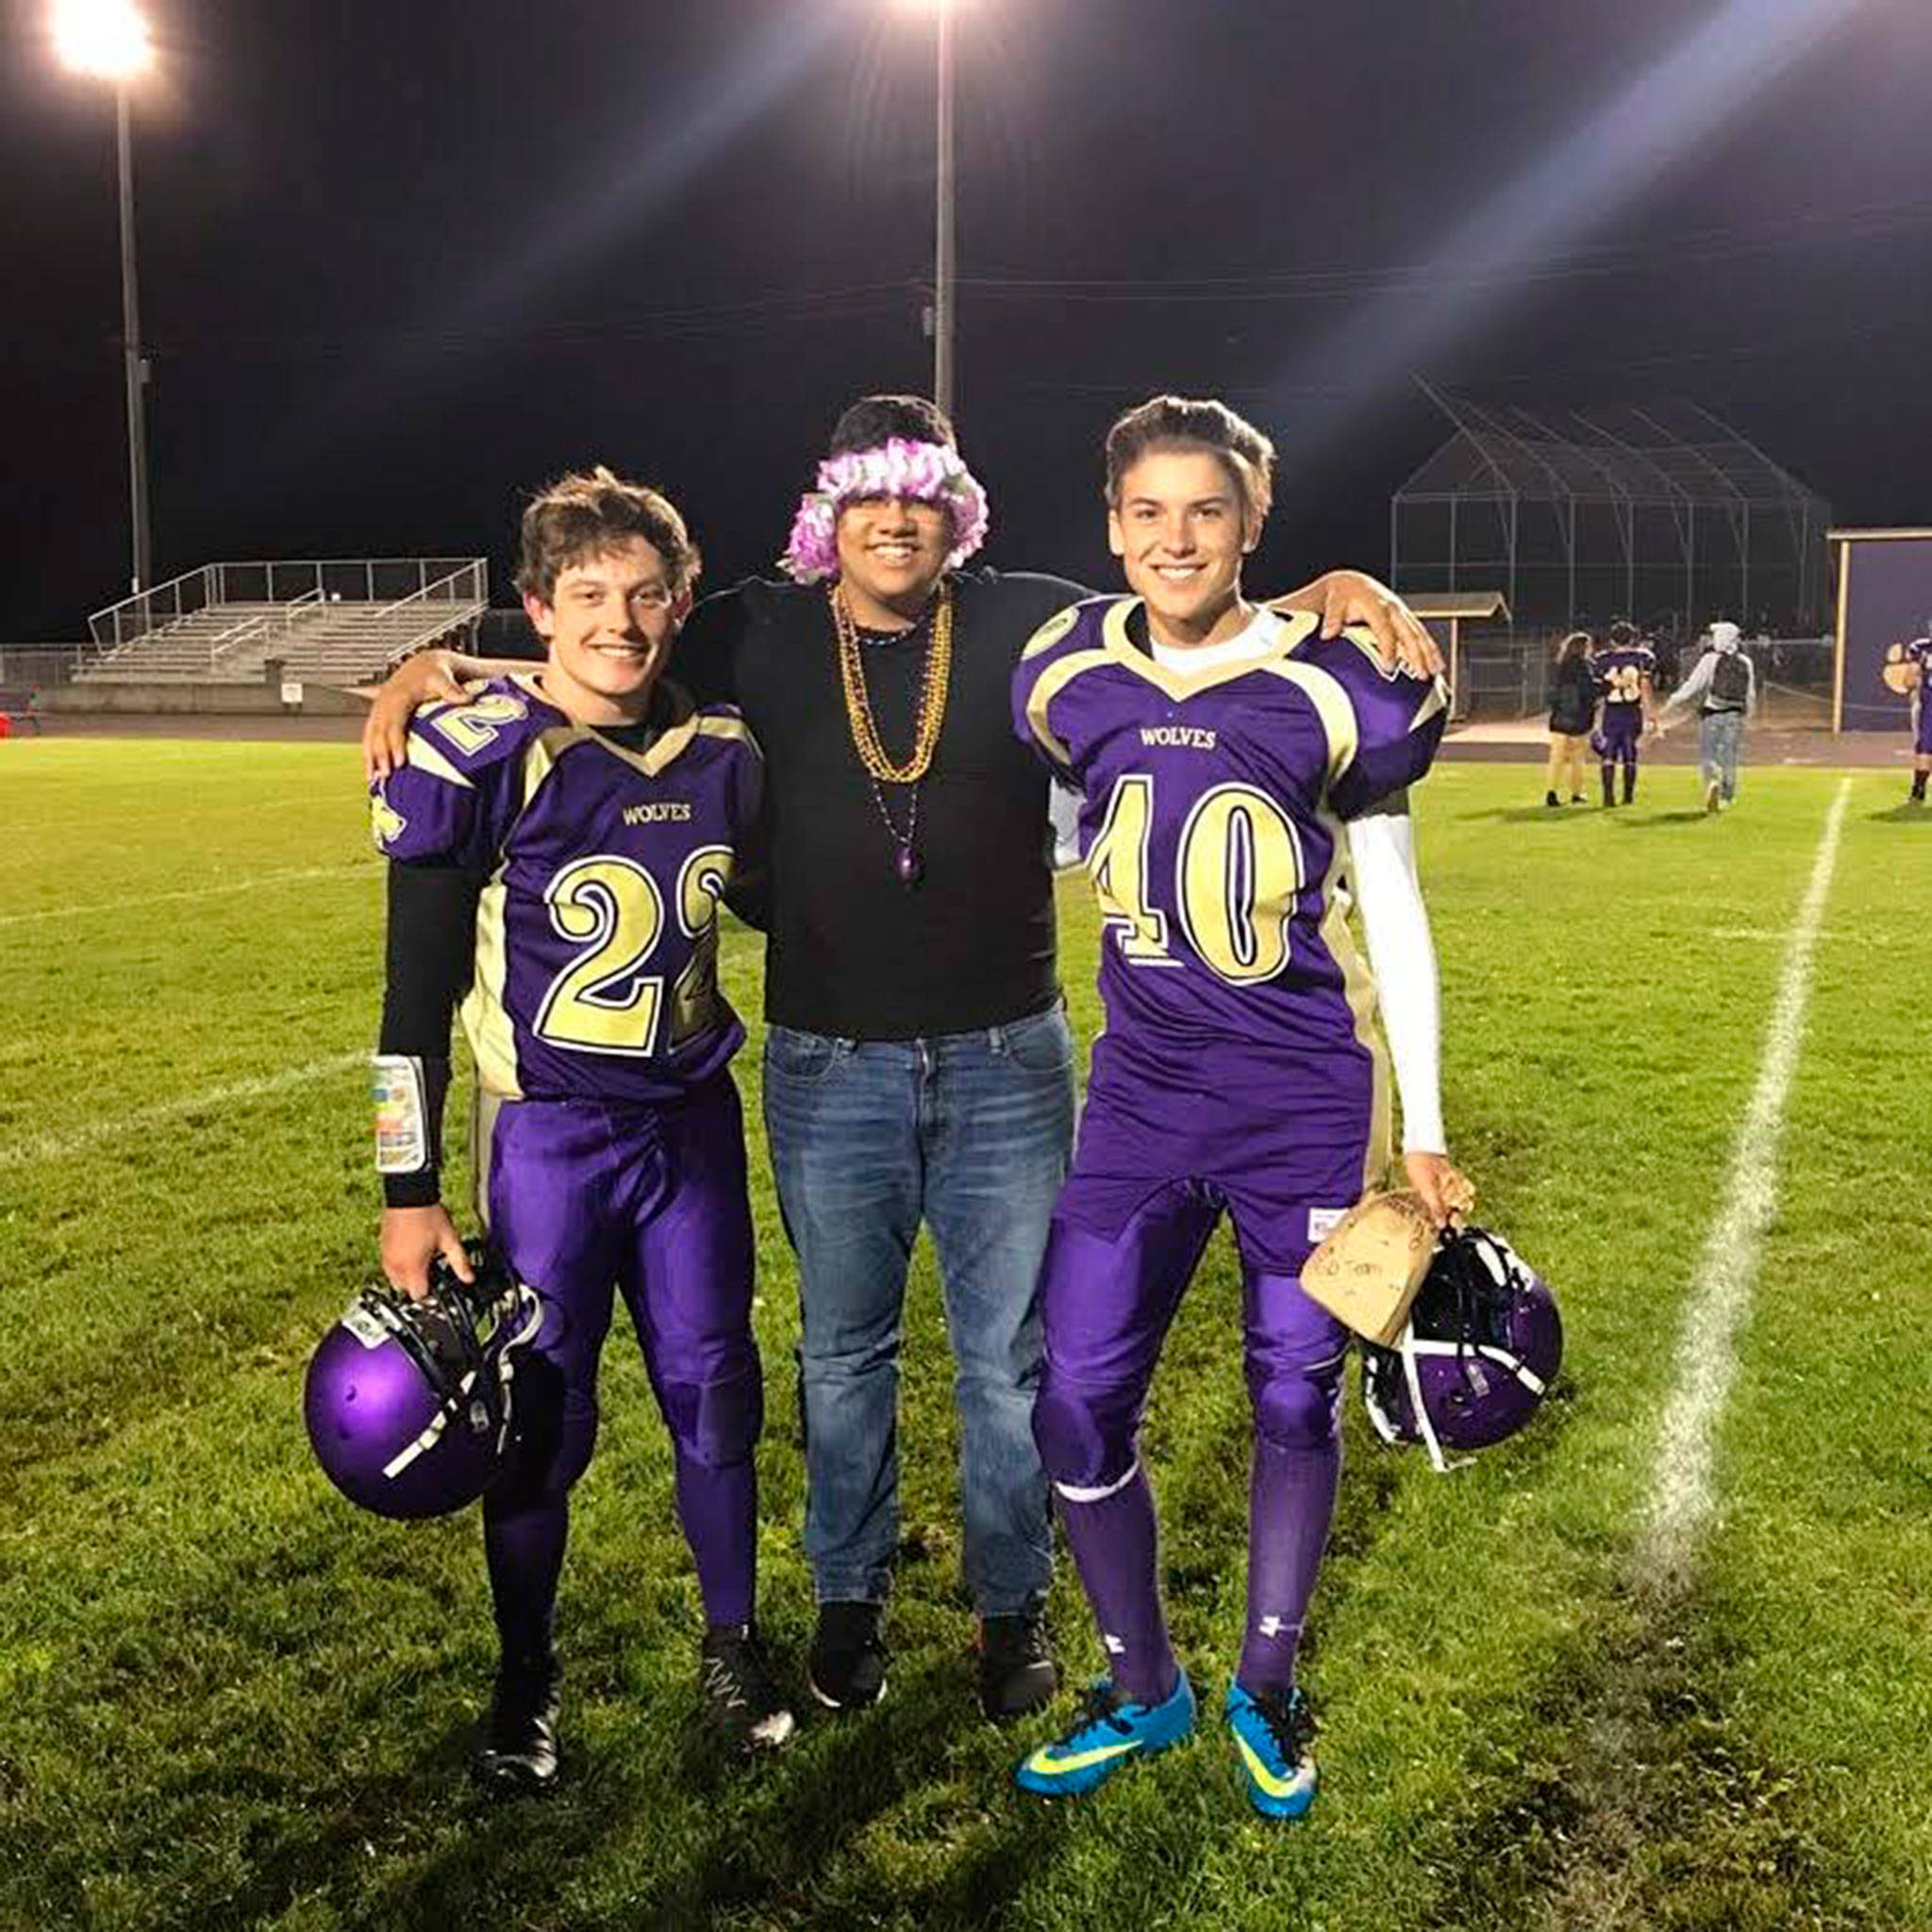 Exchange student Hayuk Minano, right, stands with friends Hayden Gresli, left, and Yussef Awawda during football season at Sequim High School. Submitted photo